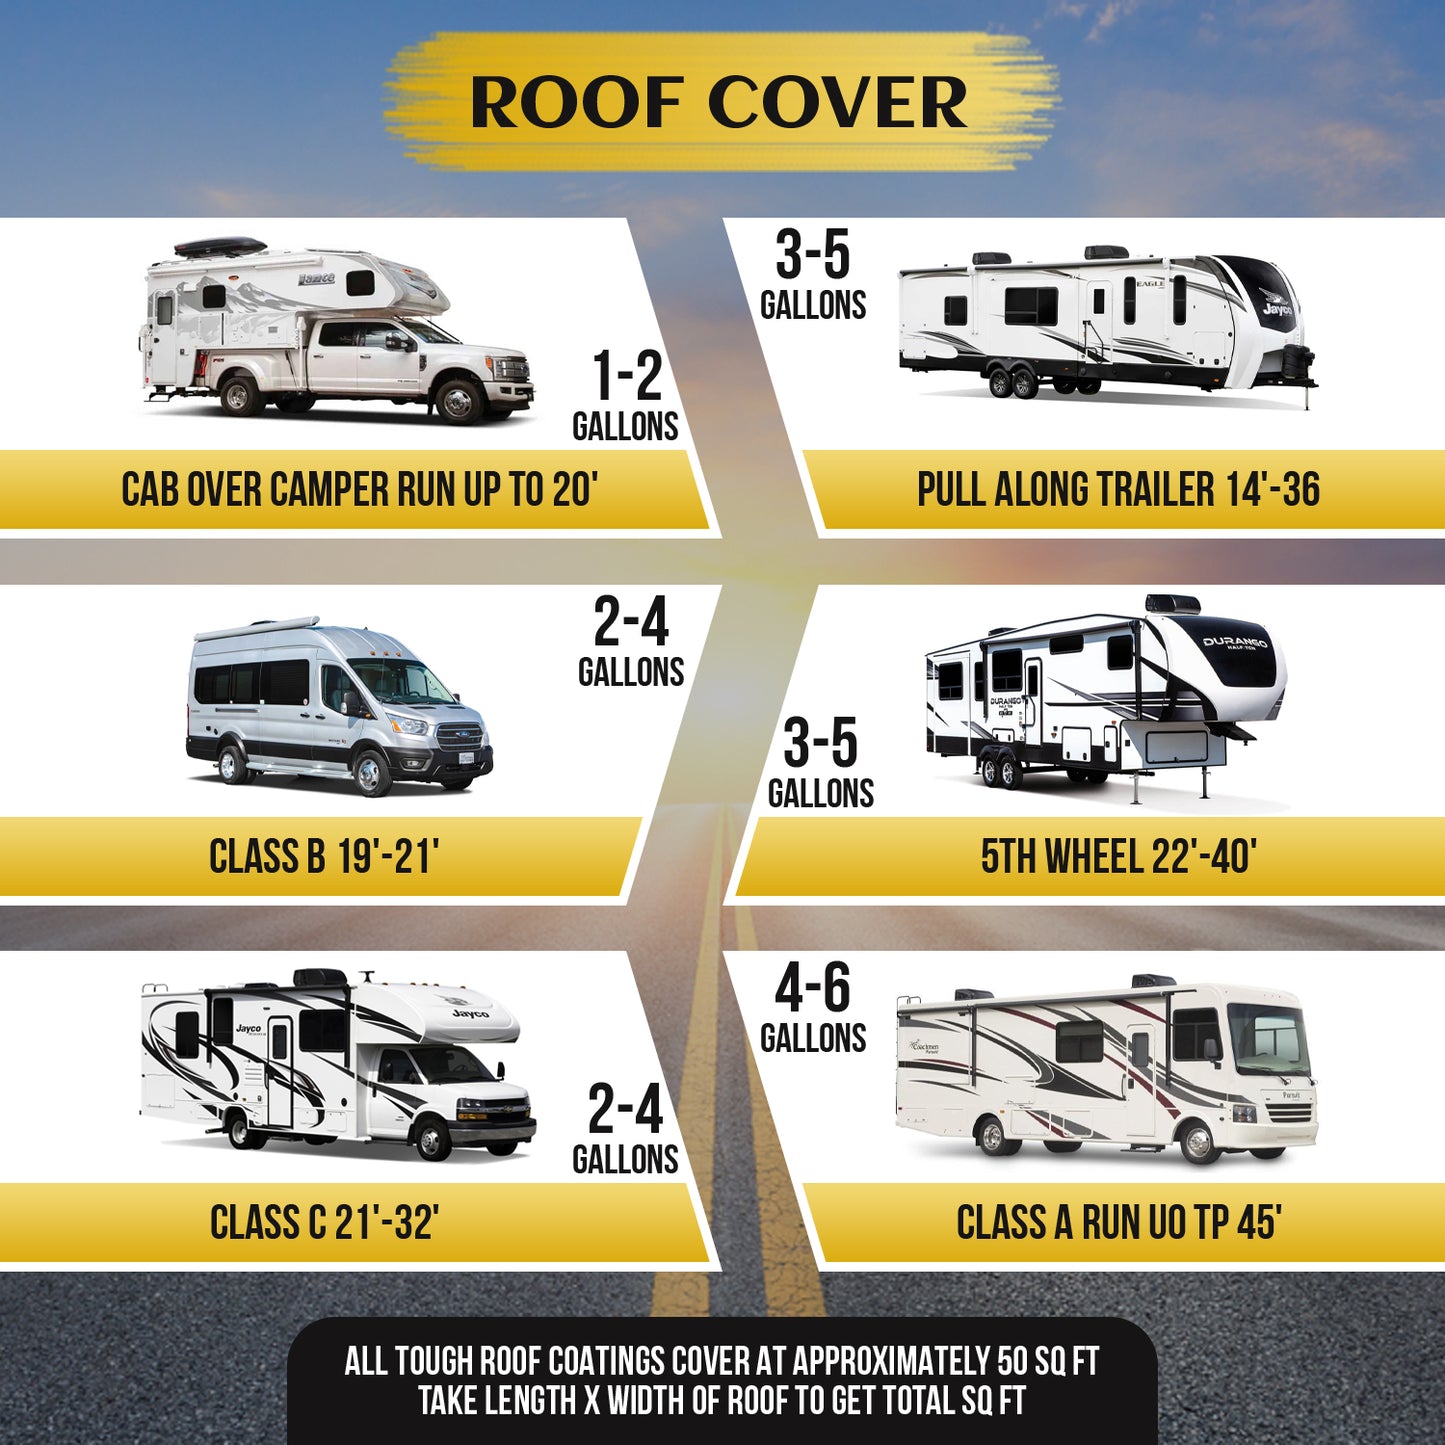 EverBond RV Roof Waterproof Coatings - RV Roof Sealant - Solar Reflective Sealant, for Trailers, Campers, Roof Repairs, and Leak Repairs. Easy to Apply Titanium White 4.75 Gallon Pail